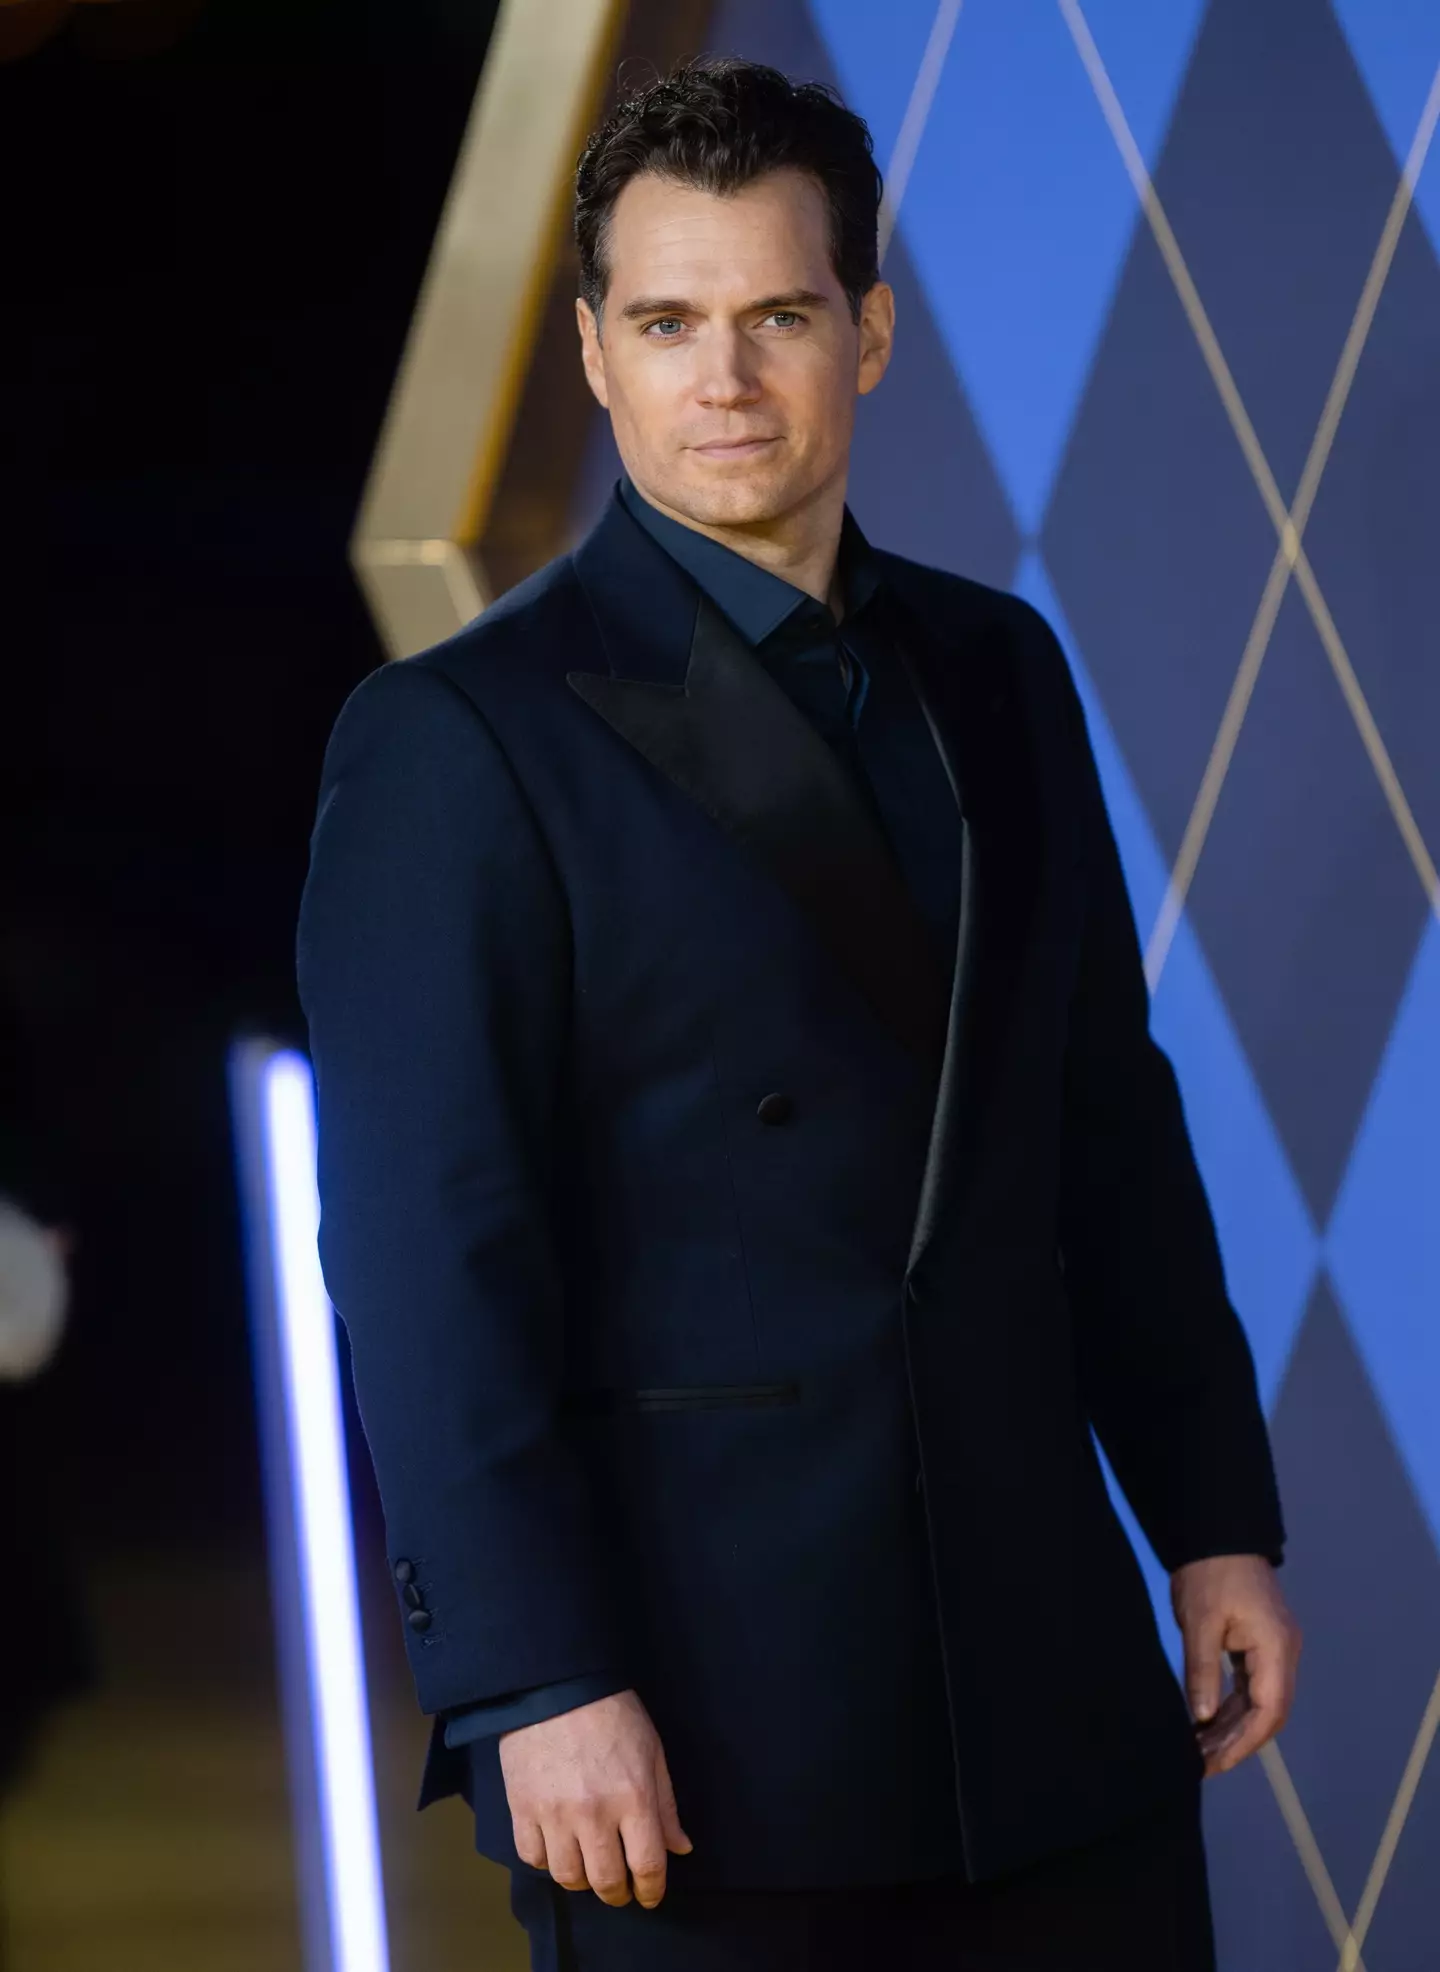 Henry Cavill is set to star and produce in the Warhammer project.